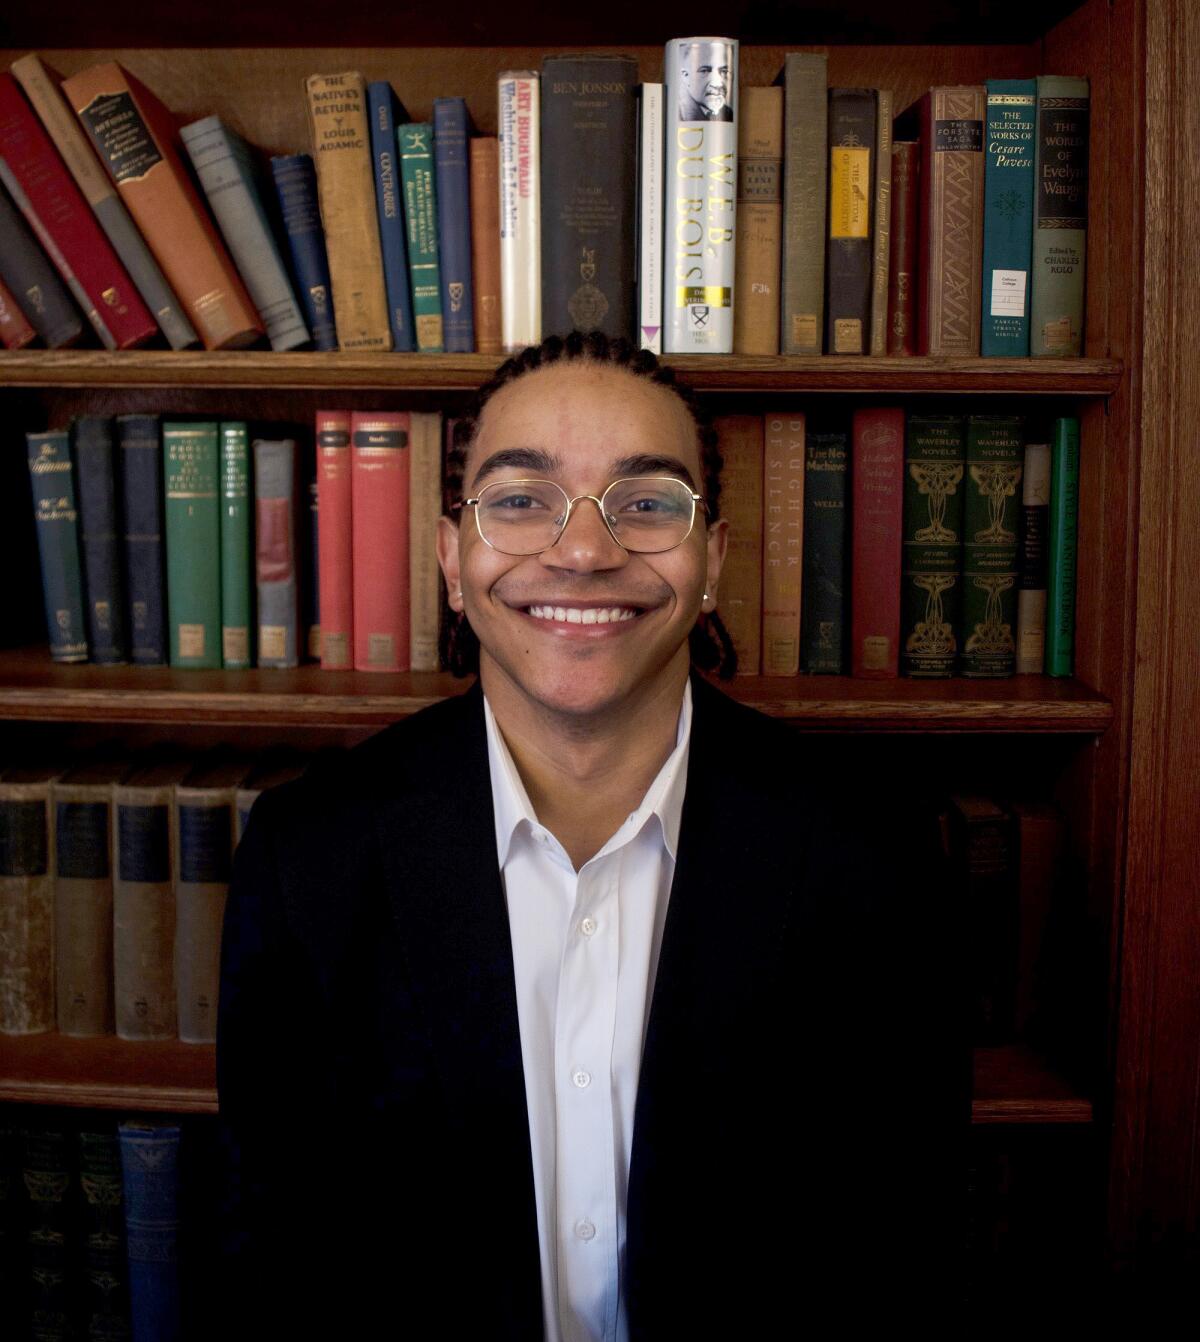 Quincy Diallo, a rising junior at Yale, poses for a portrait in front a full bookshelf.